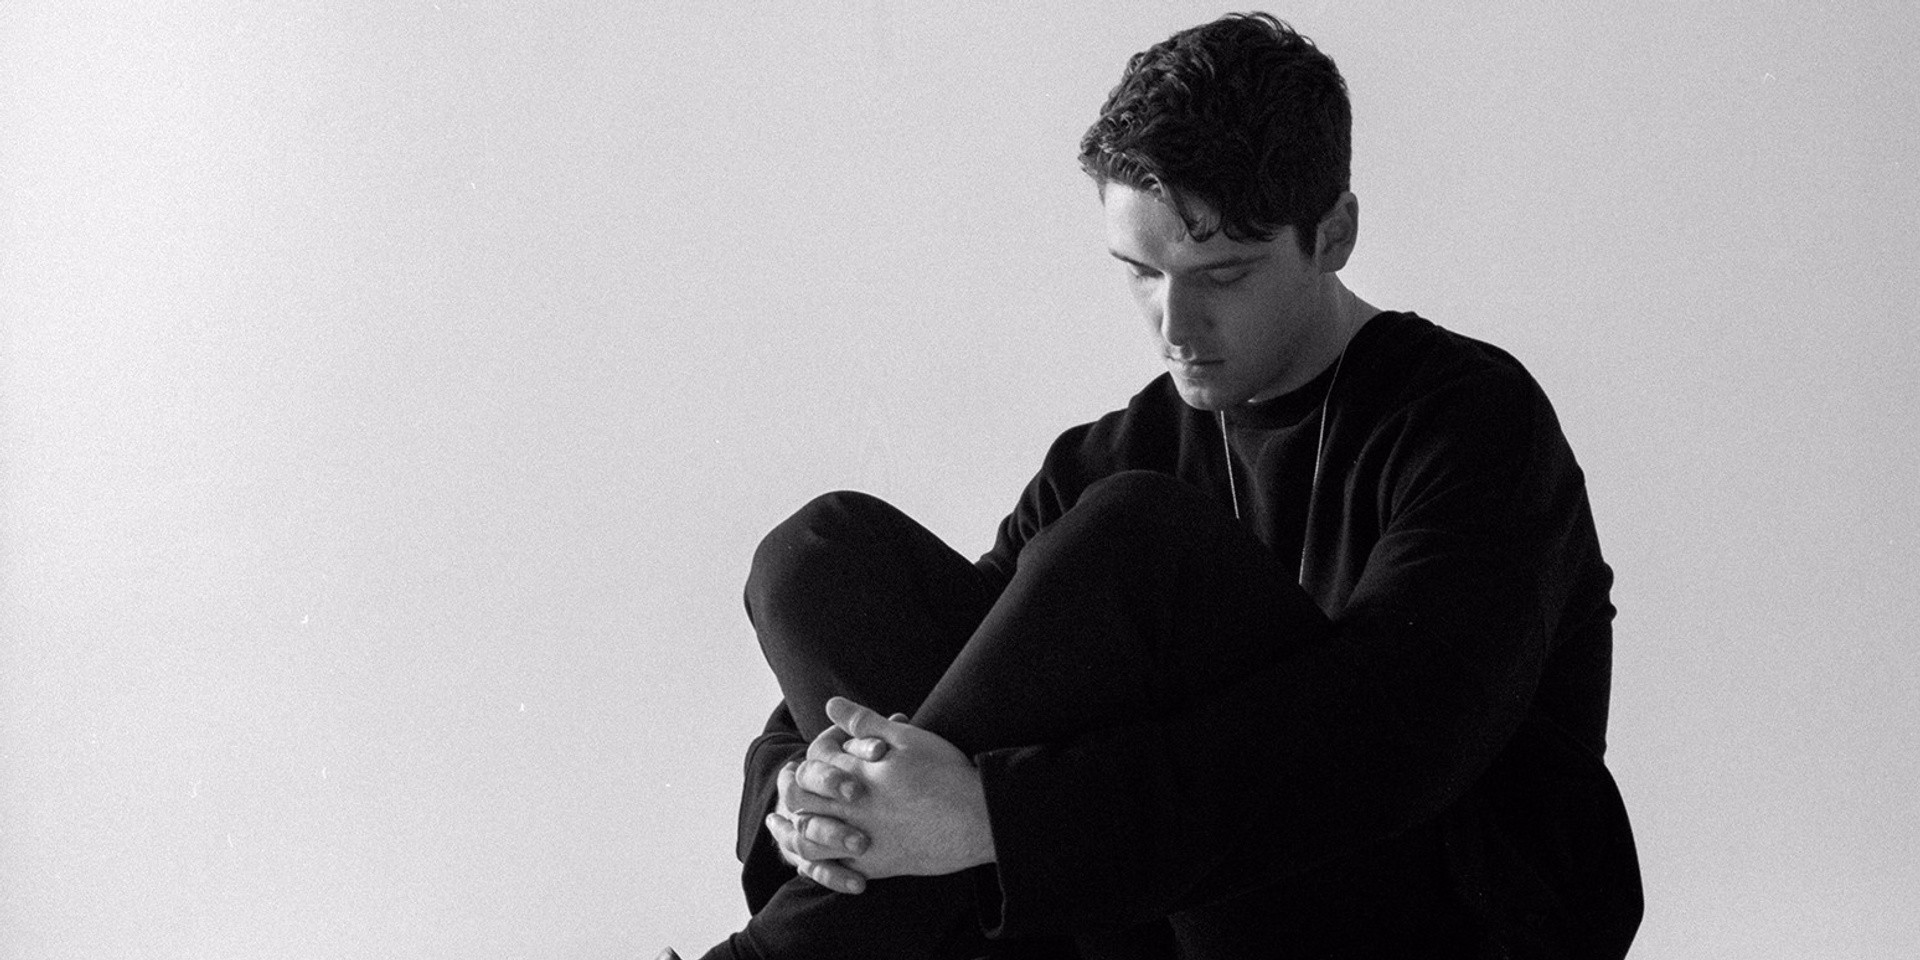 Lauv: "I write my best music when I’m vulnerable and can connect with people"